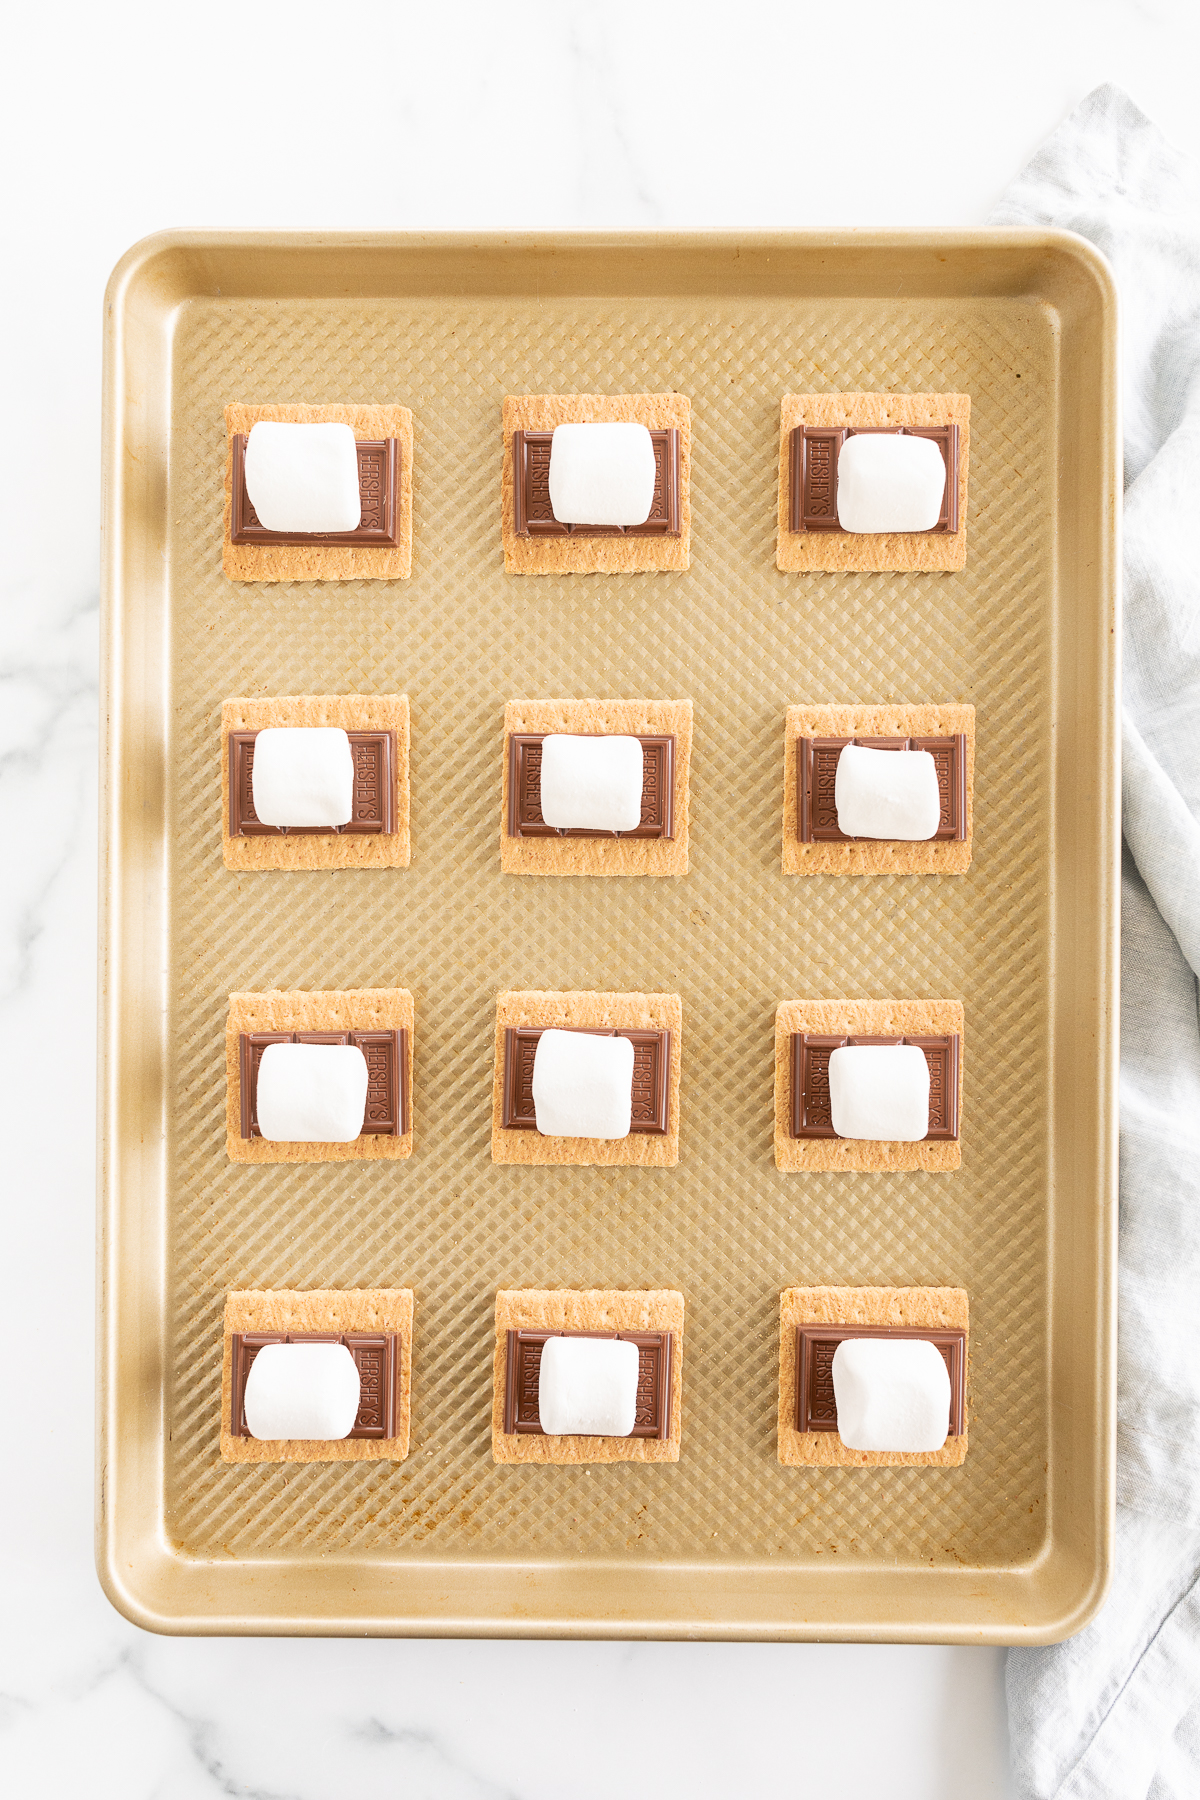 Oven-baked s'mores with marshmallow and graham crackers on a baking sheet.